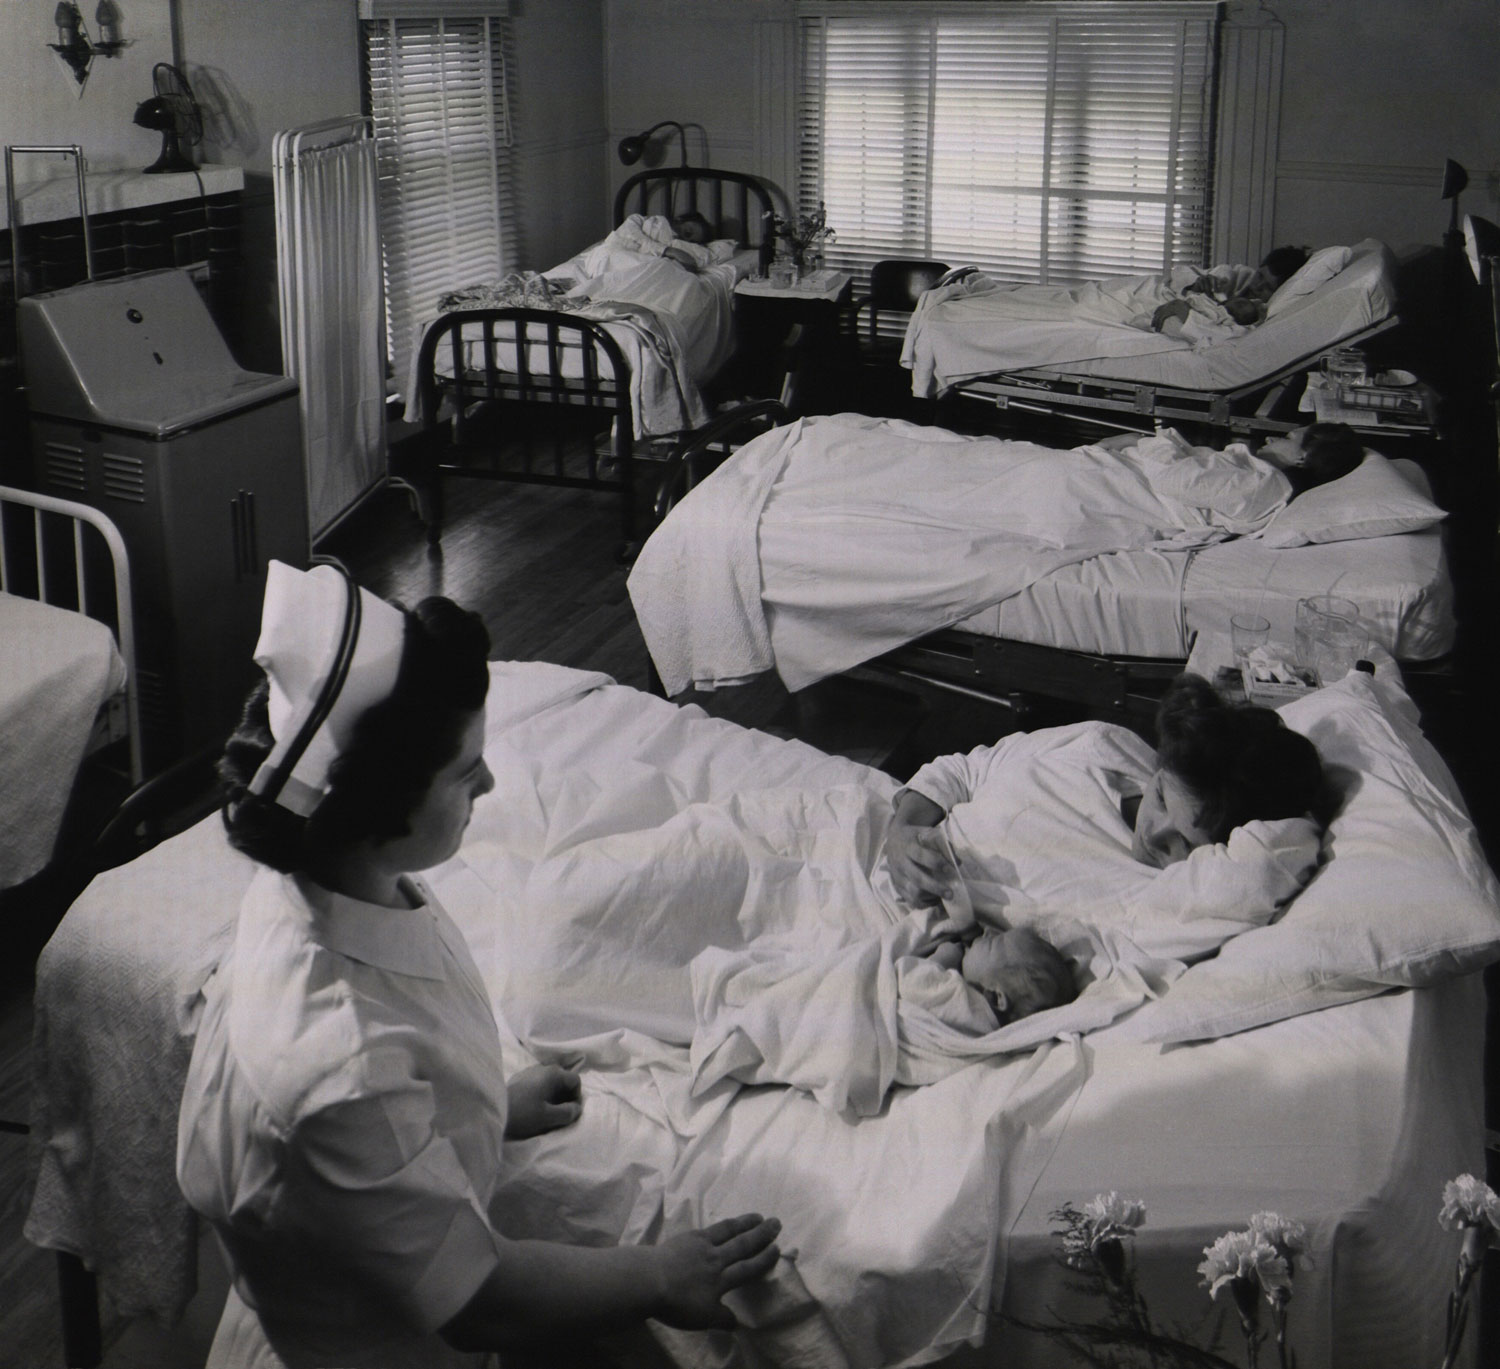 Not published in LIFE. Maternity ward, Kremmling, Colo., 1948.